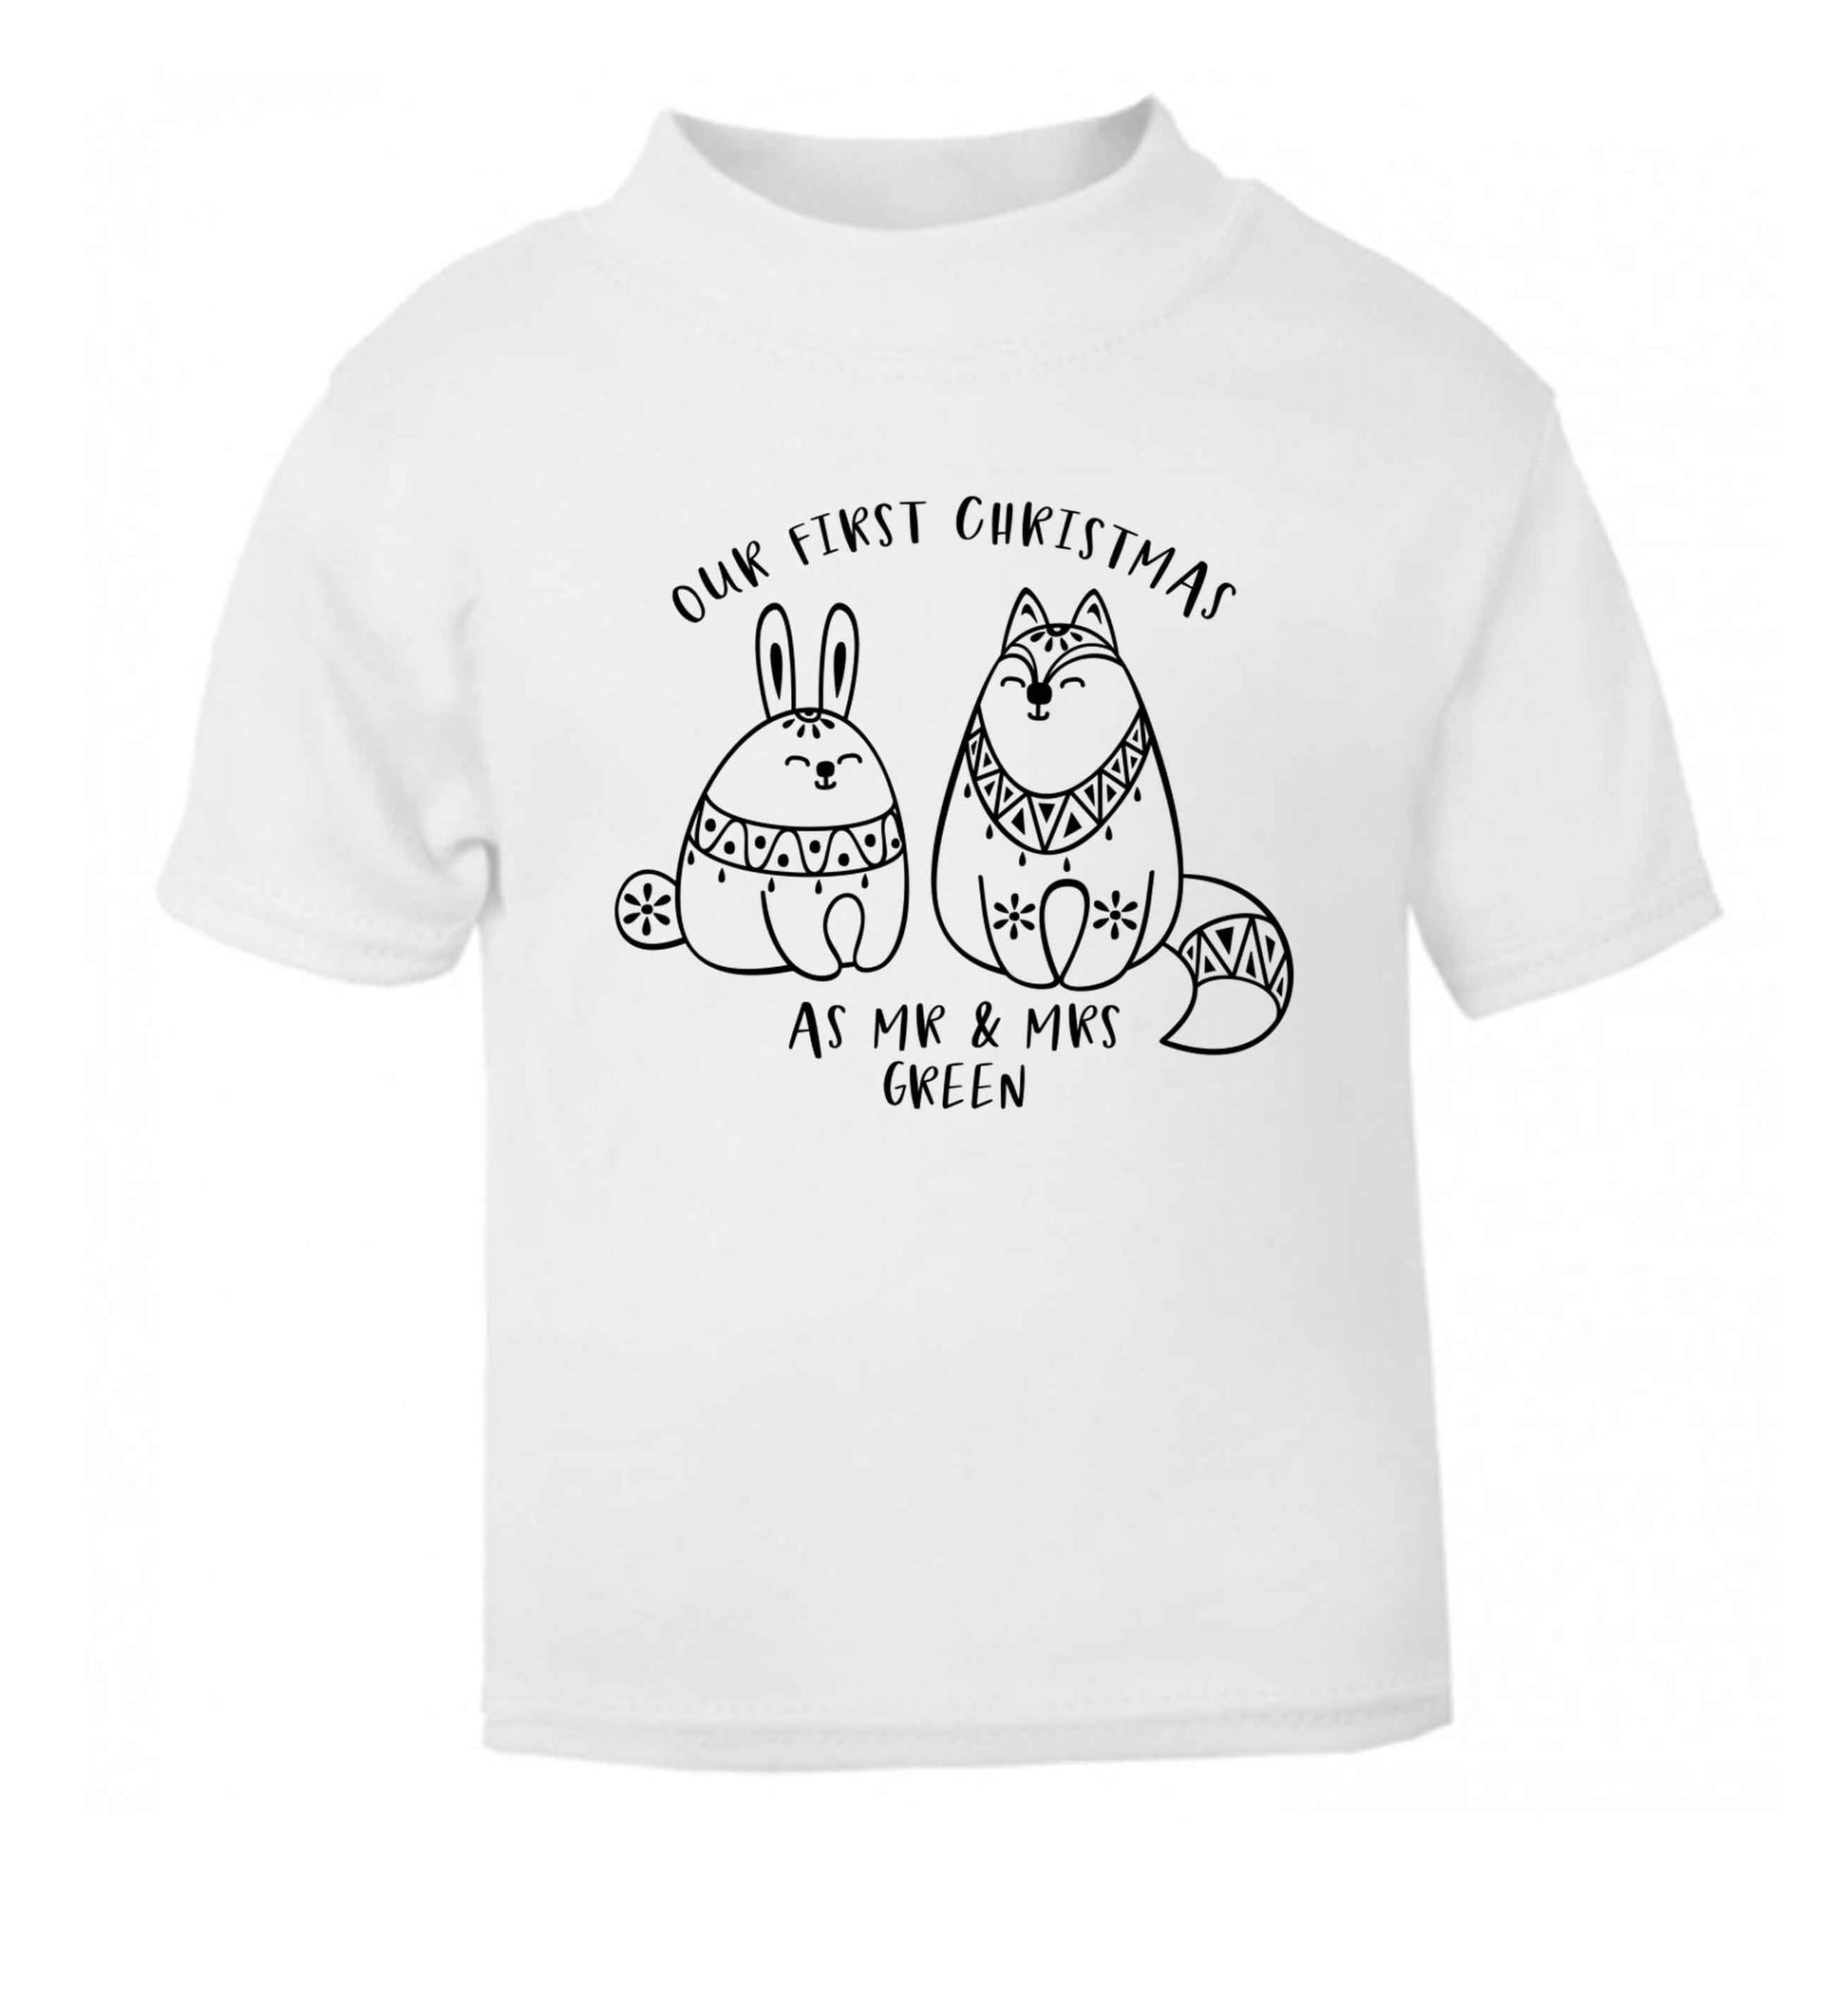 Our first Christmas as Mr & Mrs personalised white Baby Toddler Tshirt 2 Years